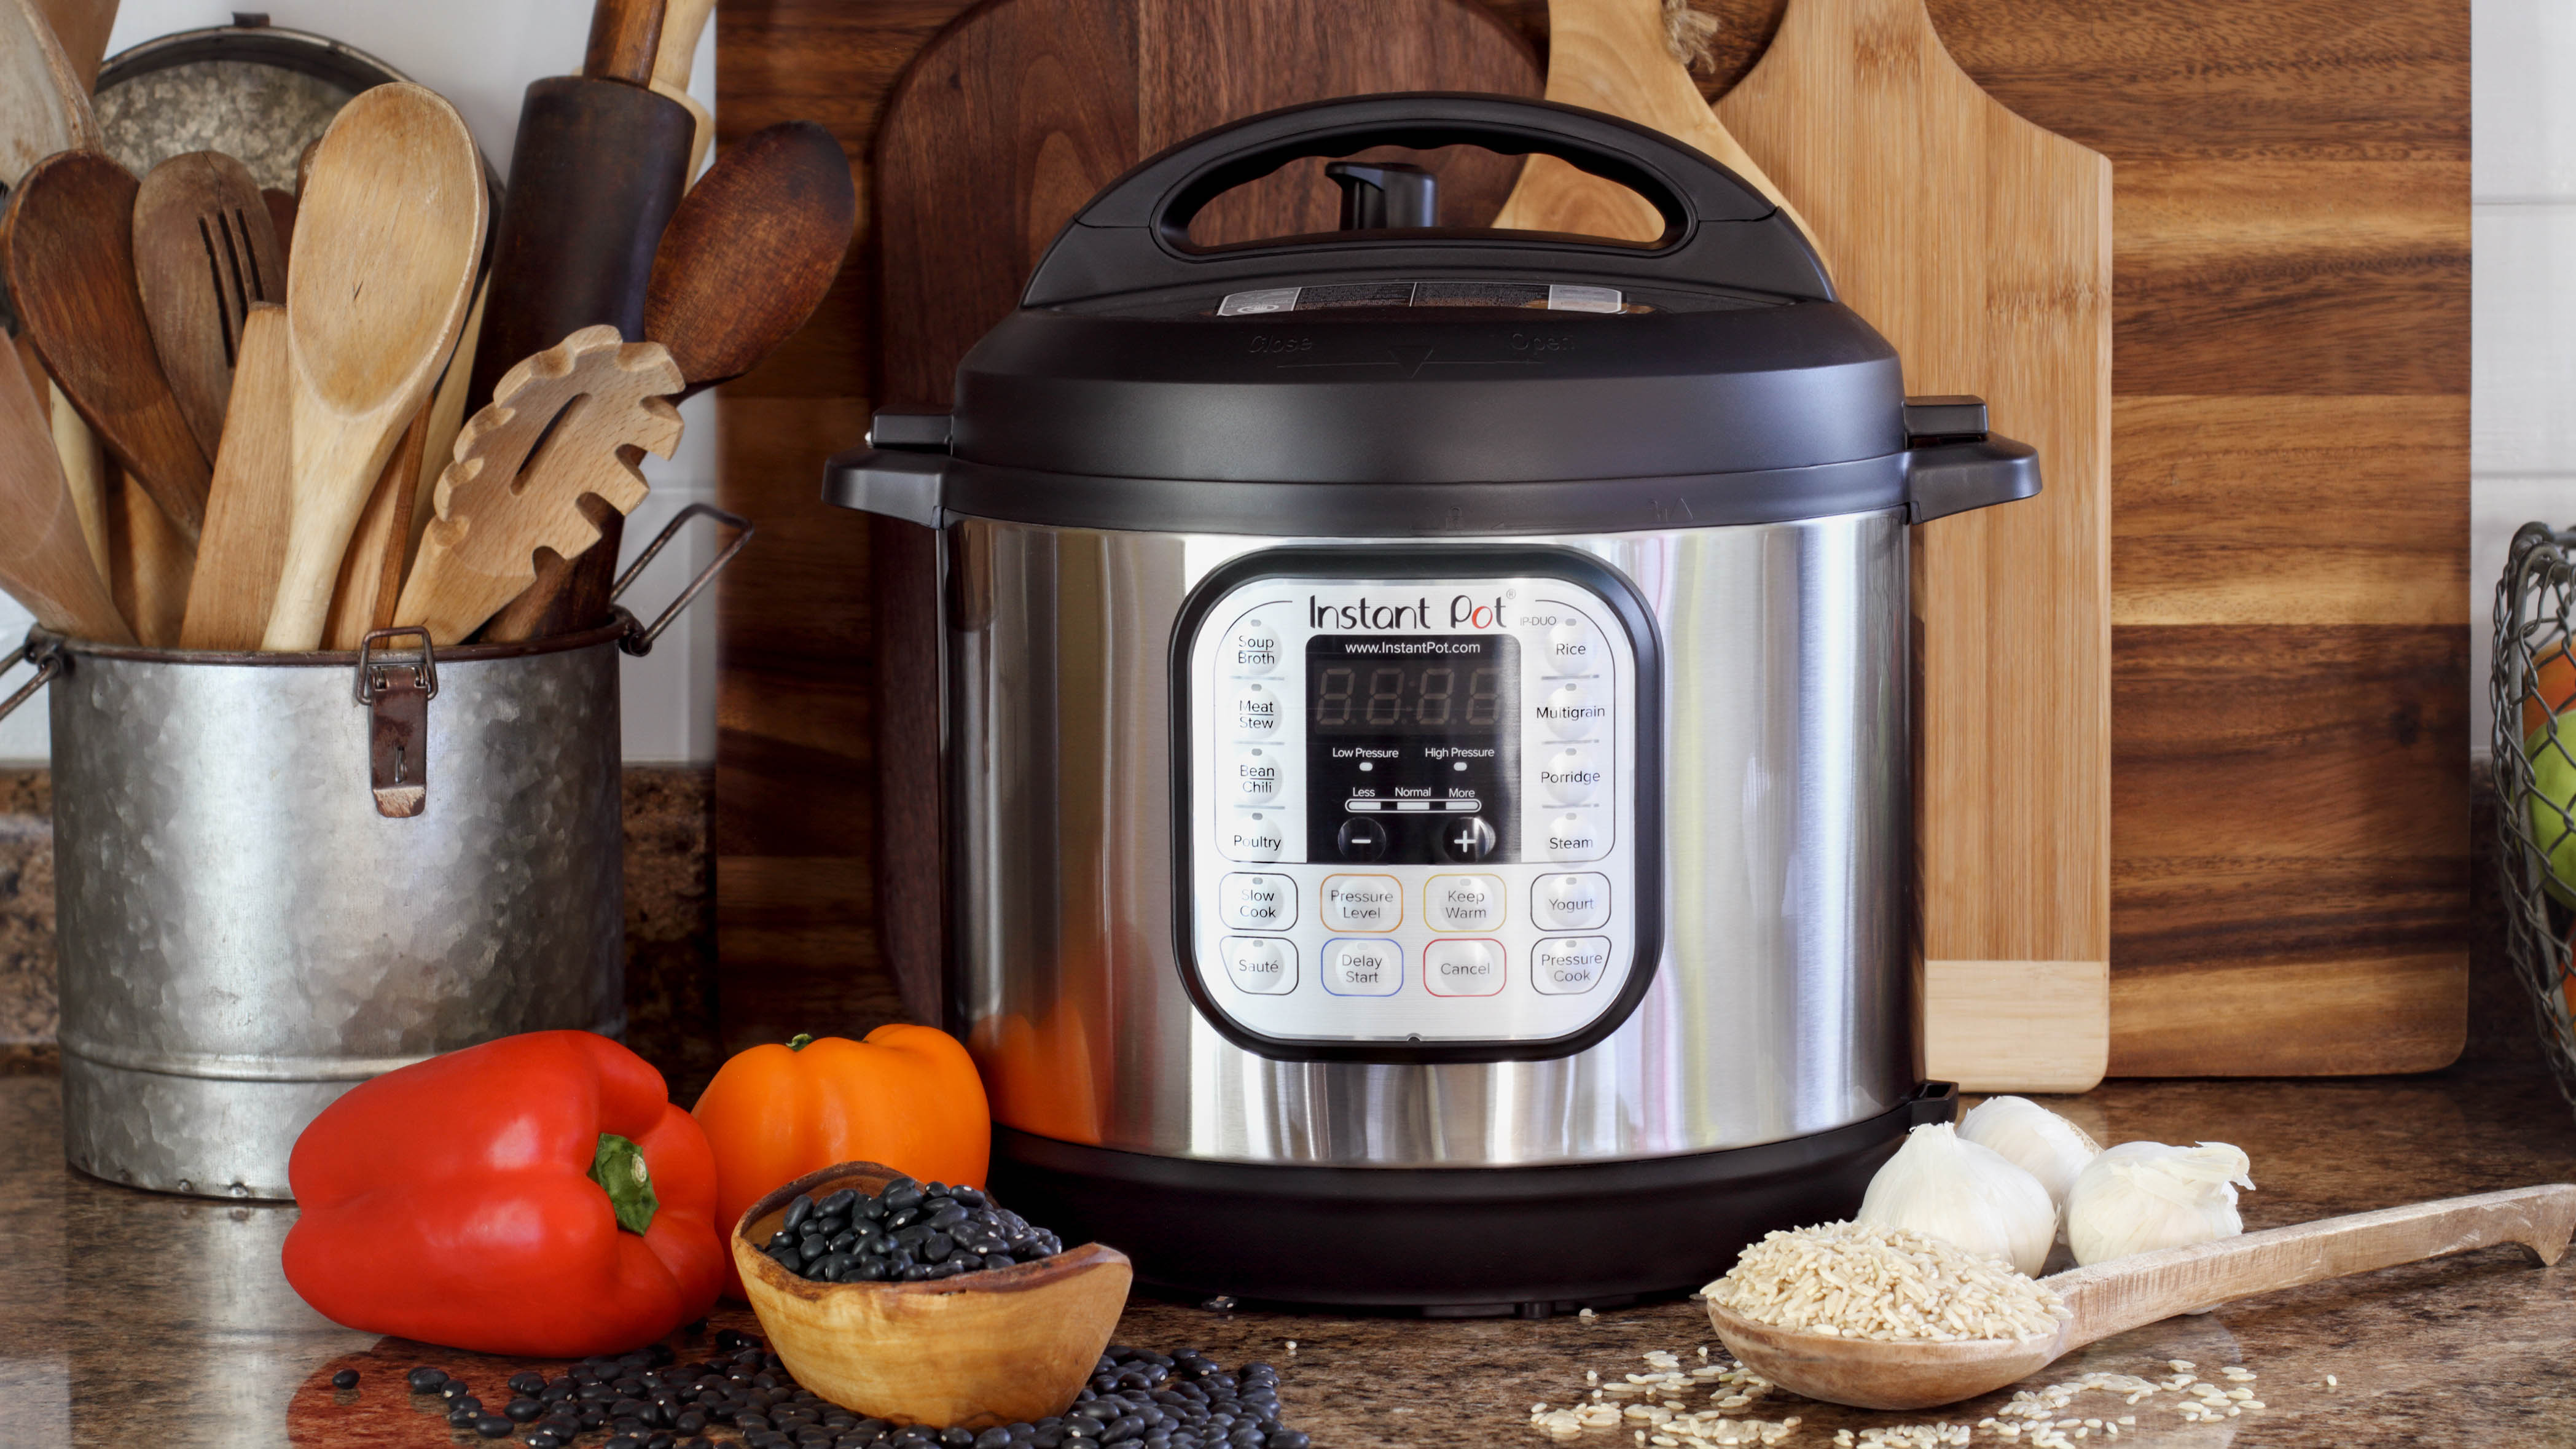 How to Clean an Instant Pot: Daily and Deep Cleaning Methods